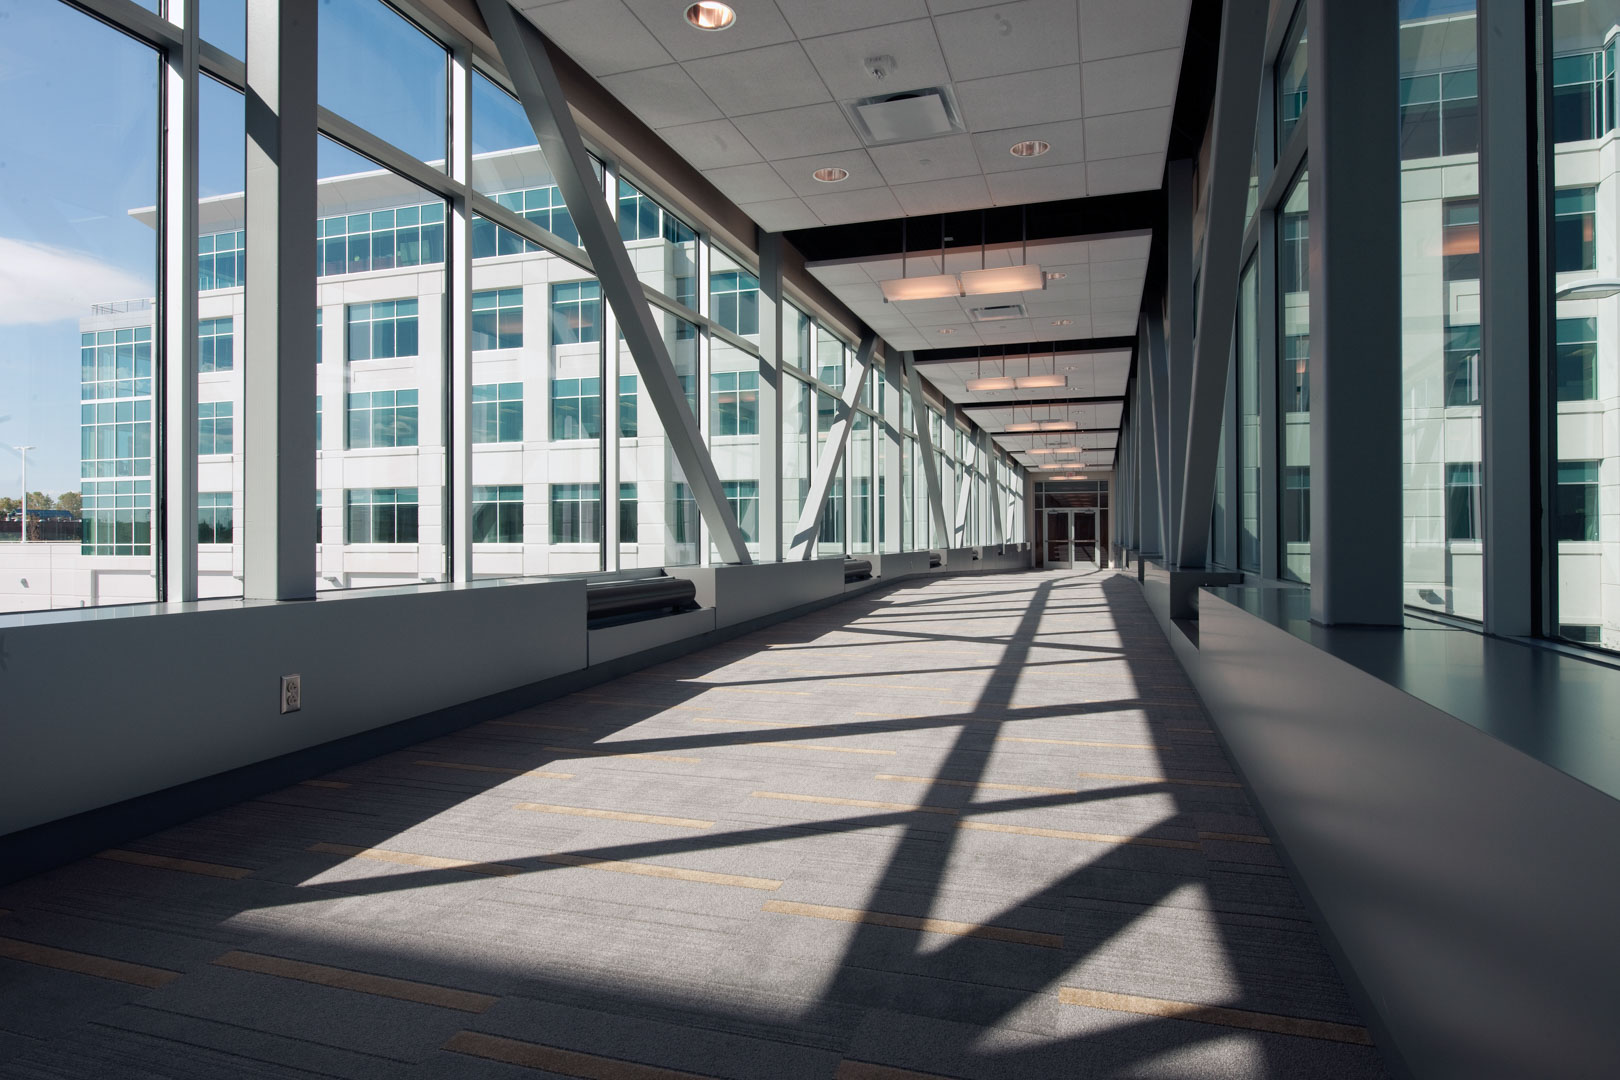 A pedestrian bridge connects the new office building to the existing buildings